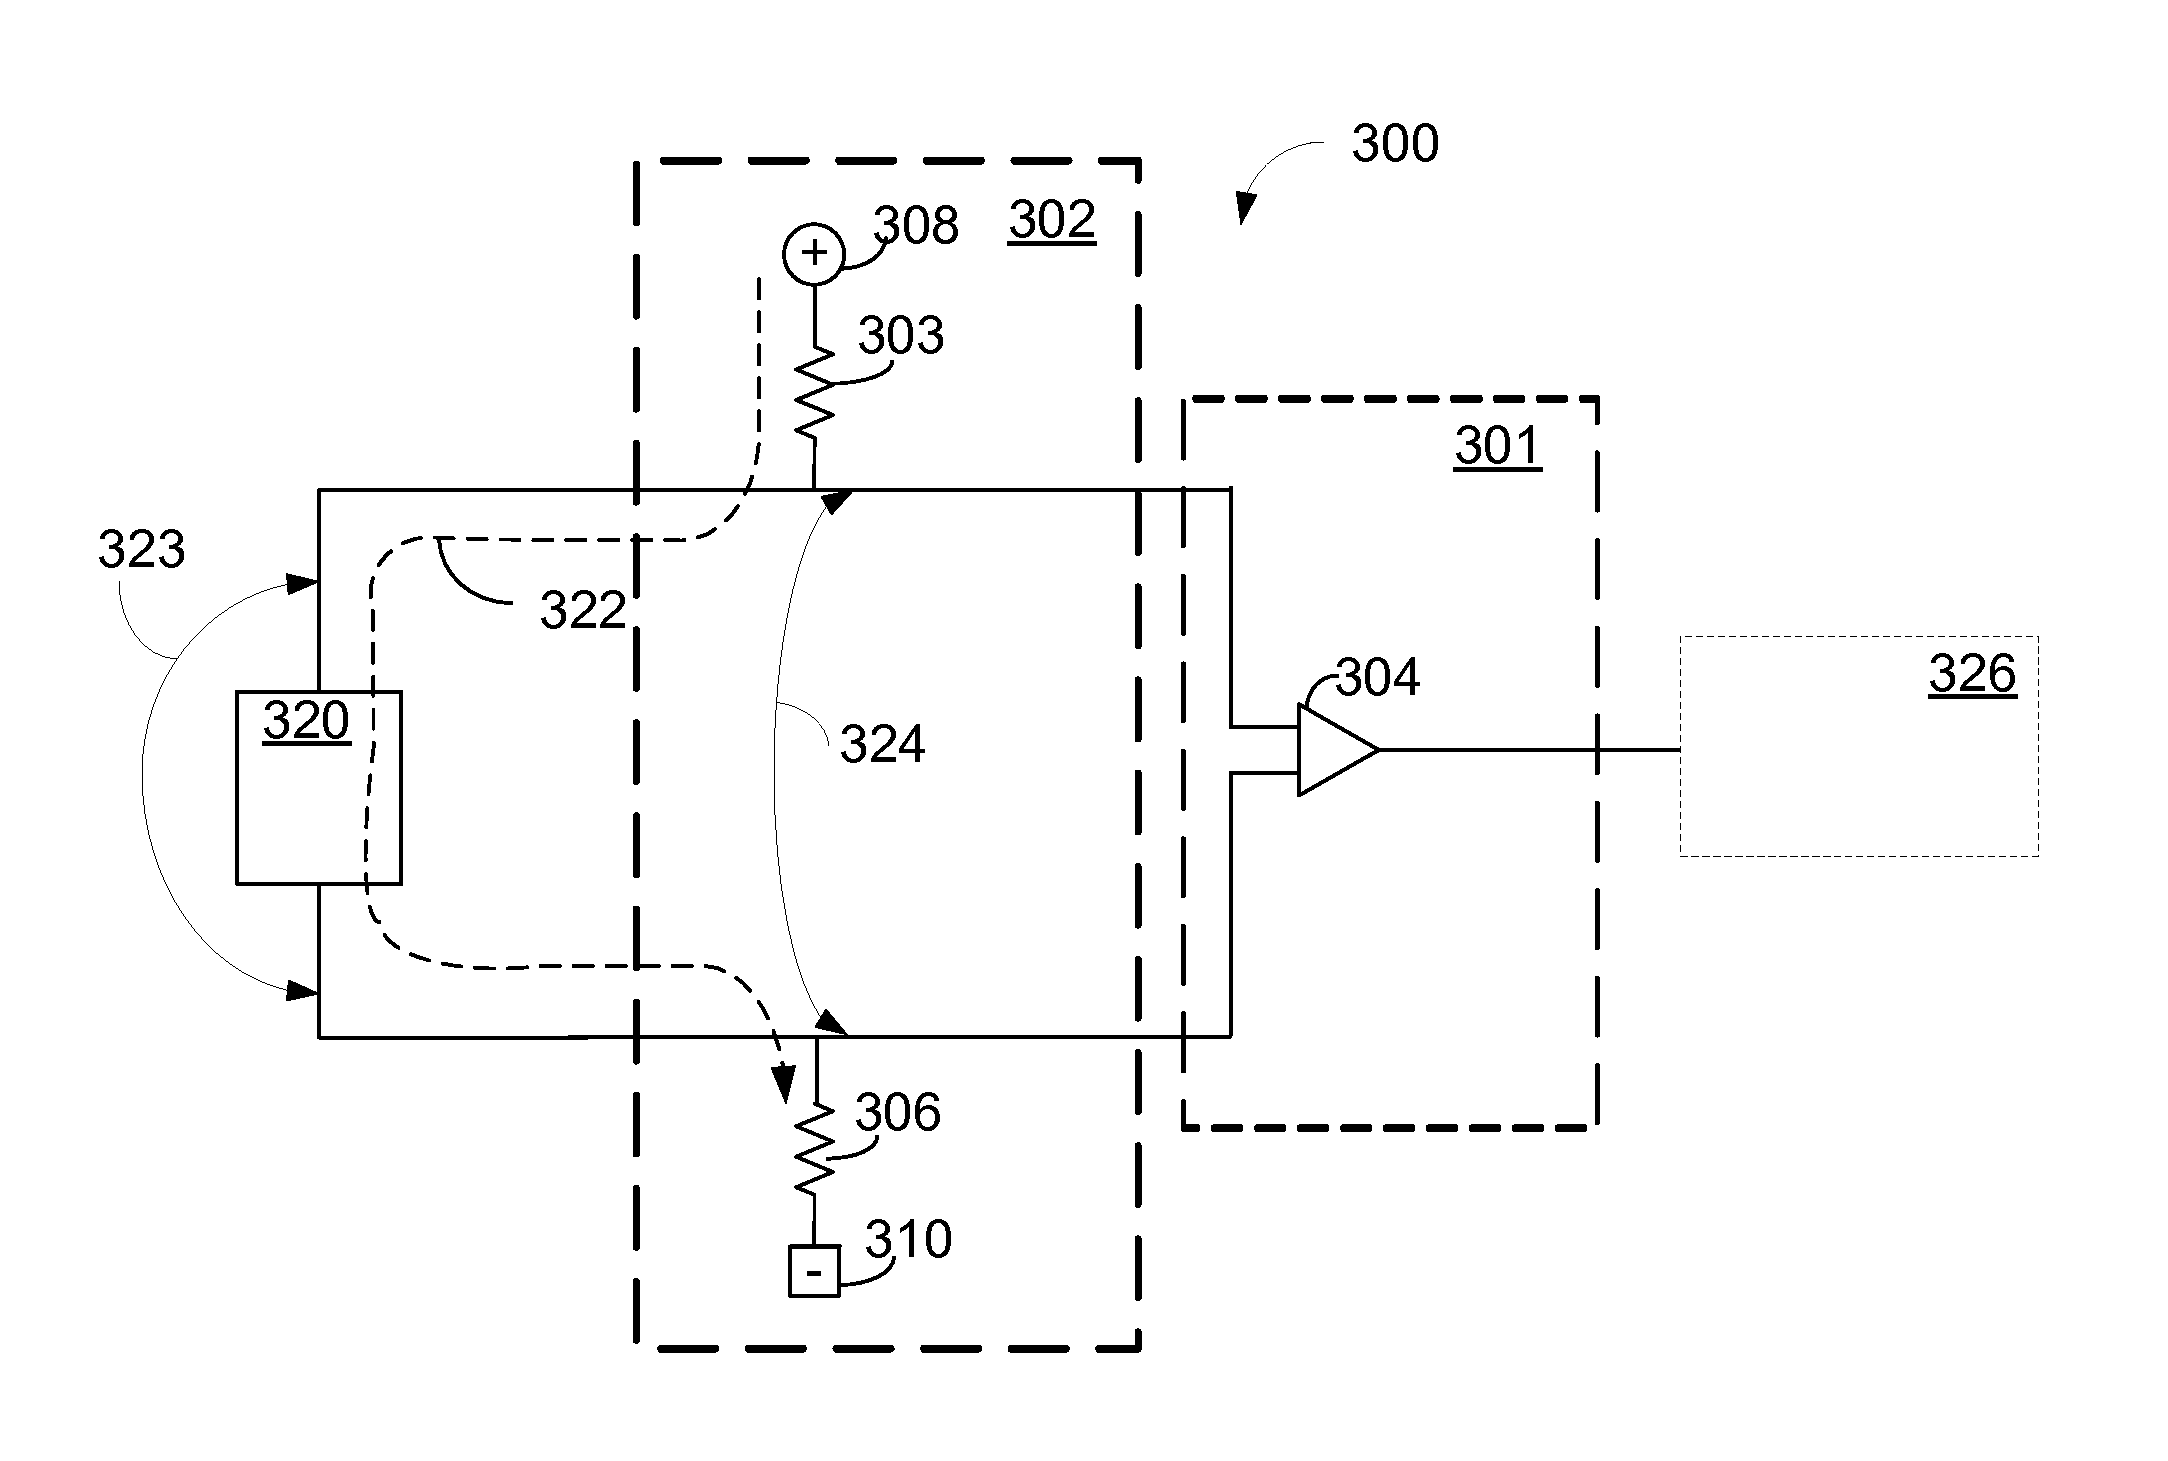 Systems, methods, and apparatus for connection fault self-monitoring with DC bias current